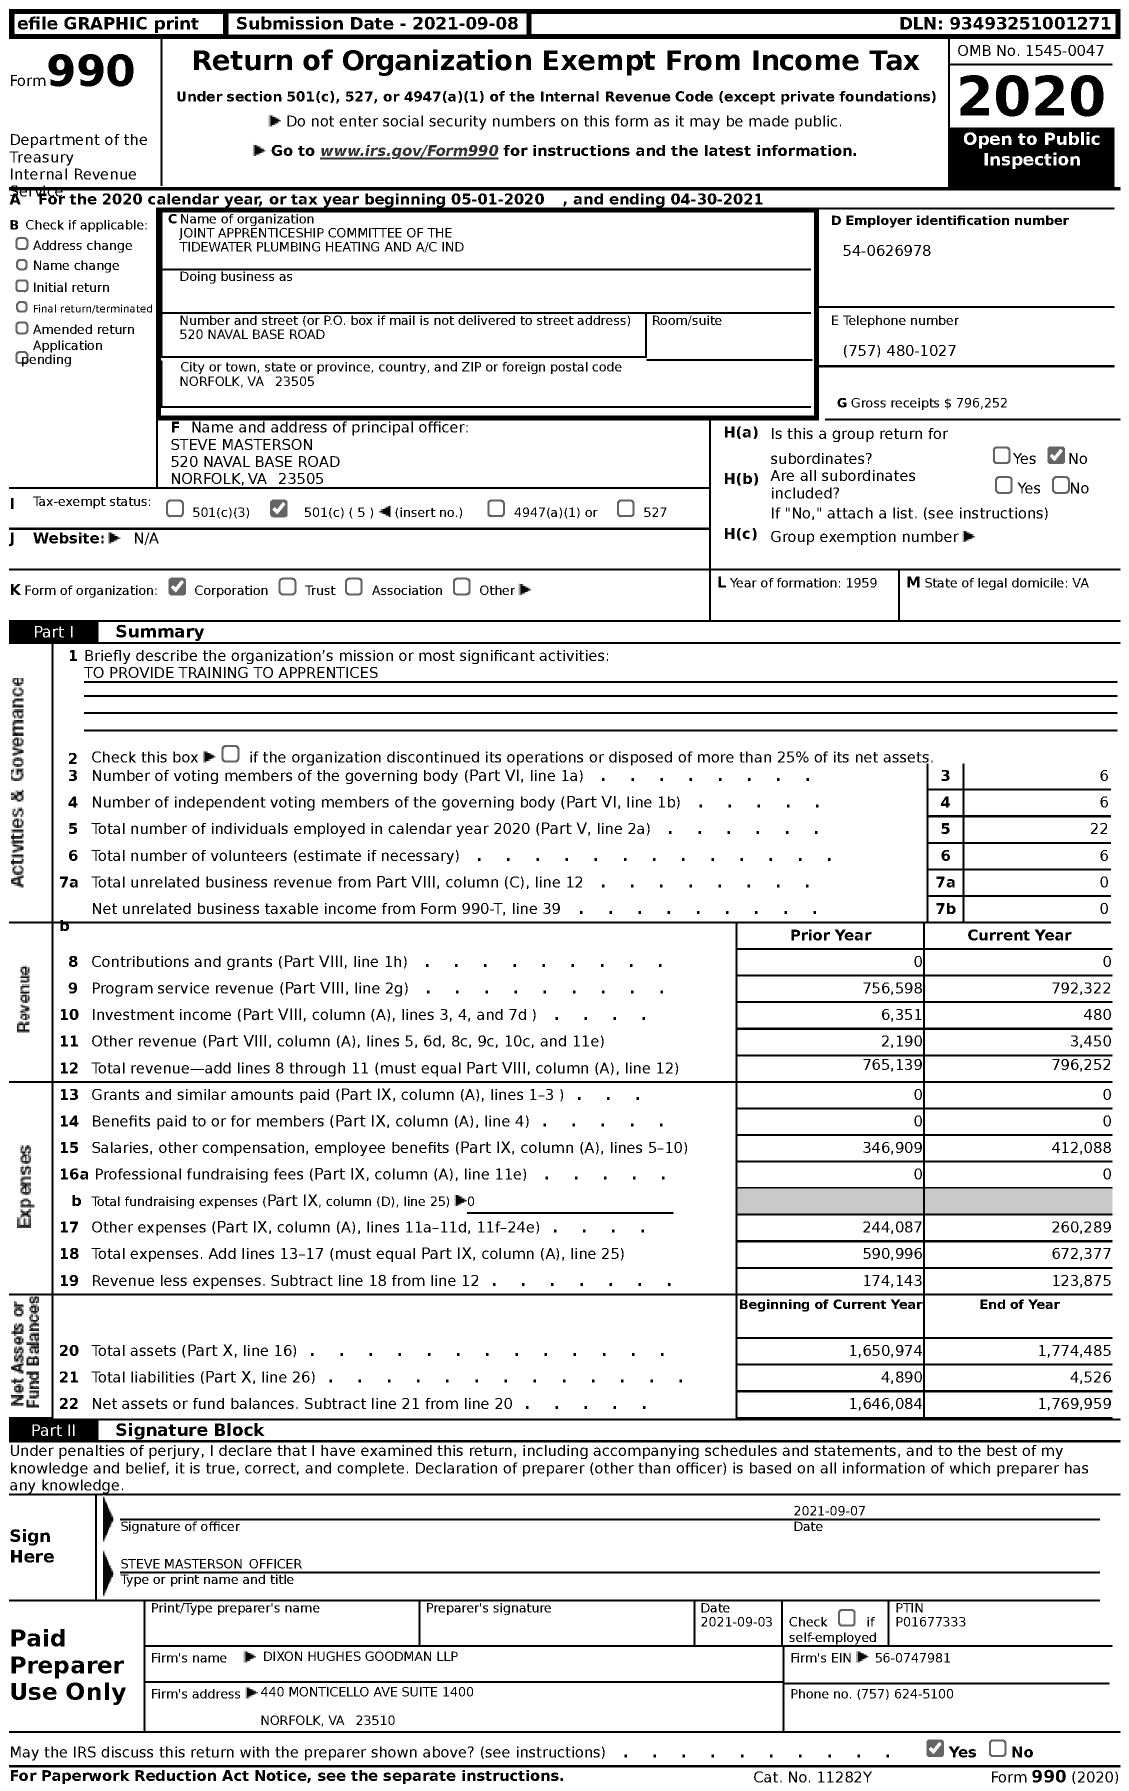 Image of first page of 2020 Form 990 for Joint Apprenticeship Committee of the Tidewater Plumbing Heating and A / C Ind